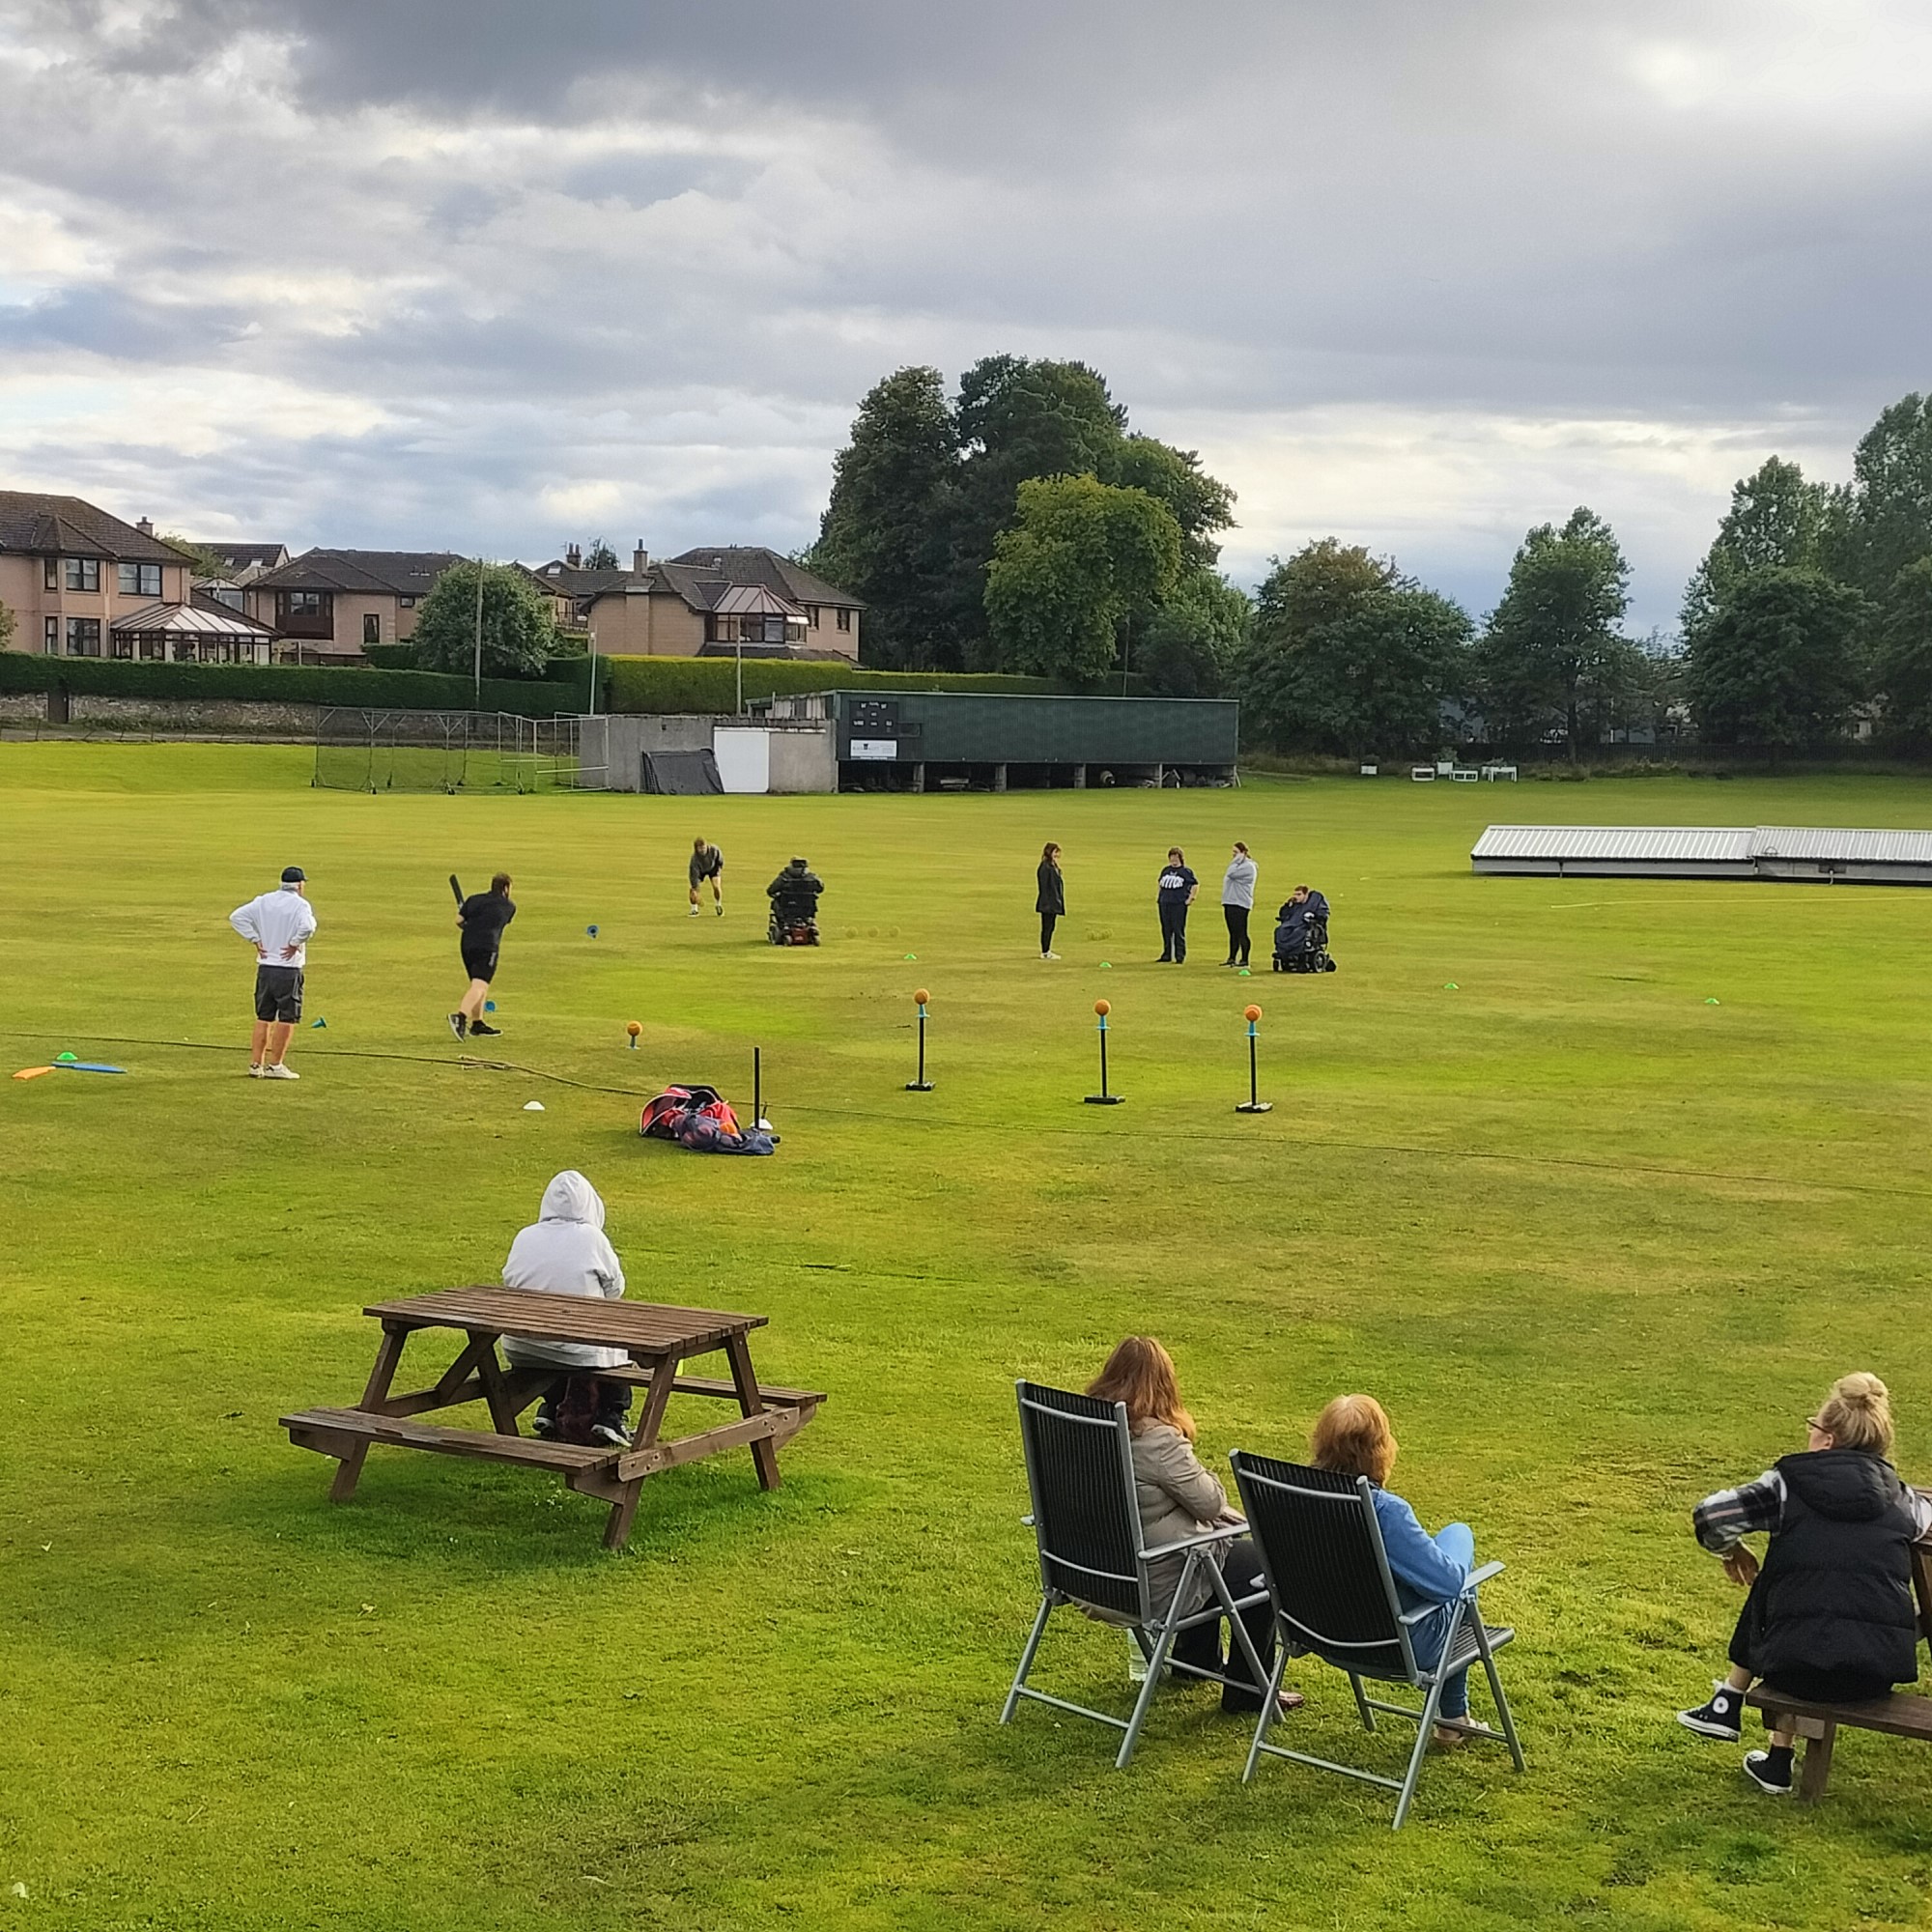 Disability Cricket club members playing a game in a field with people sitting in chairs watching.